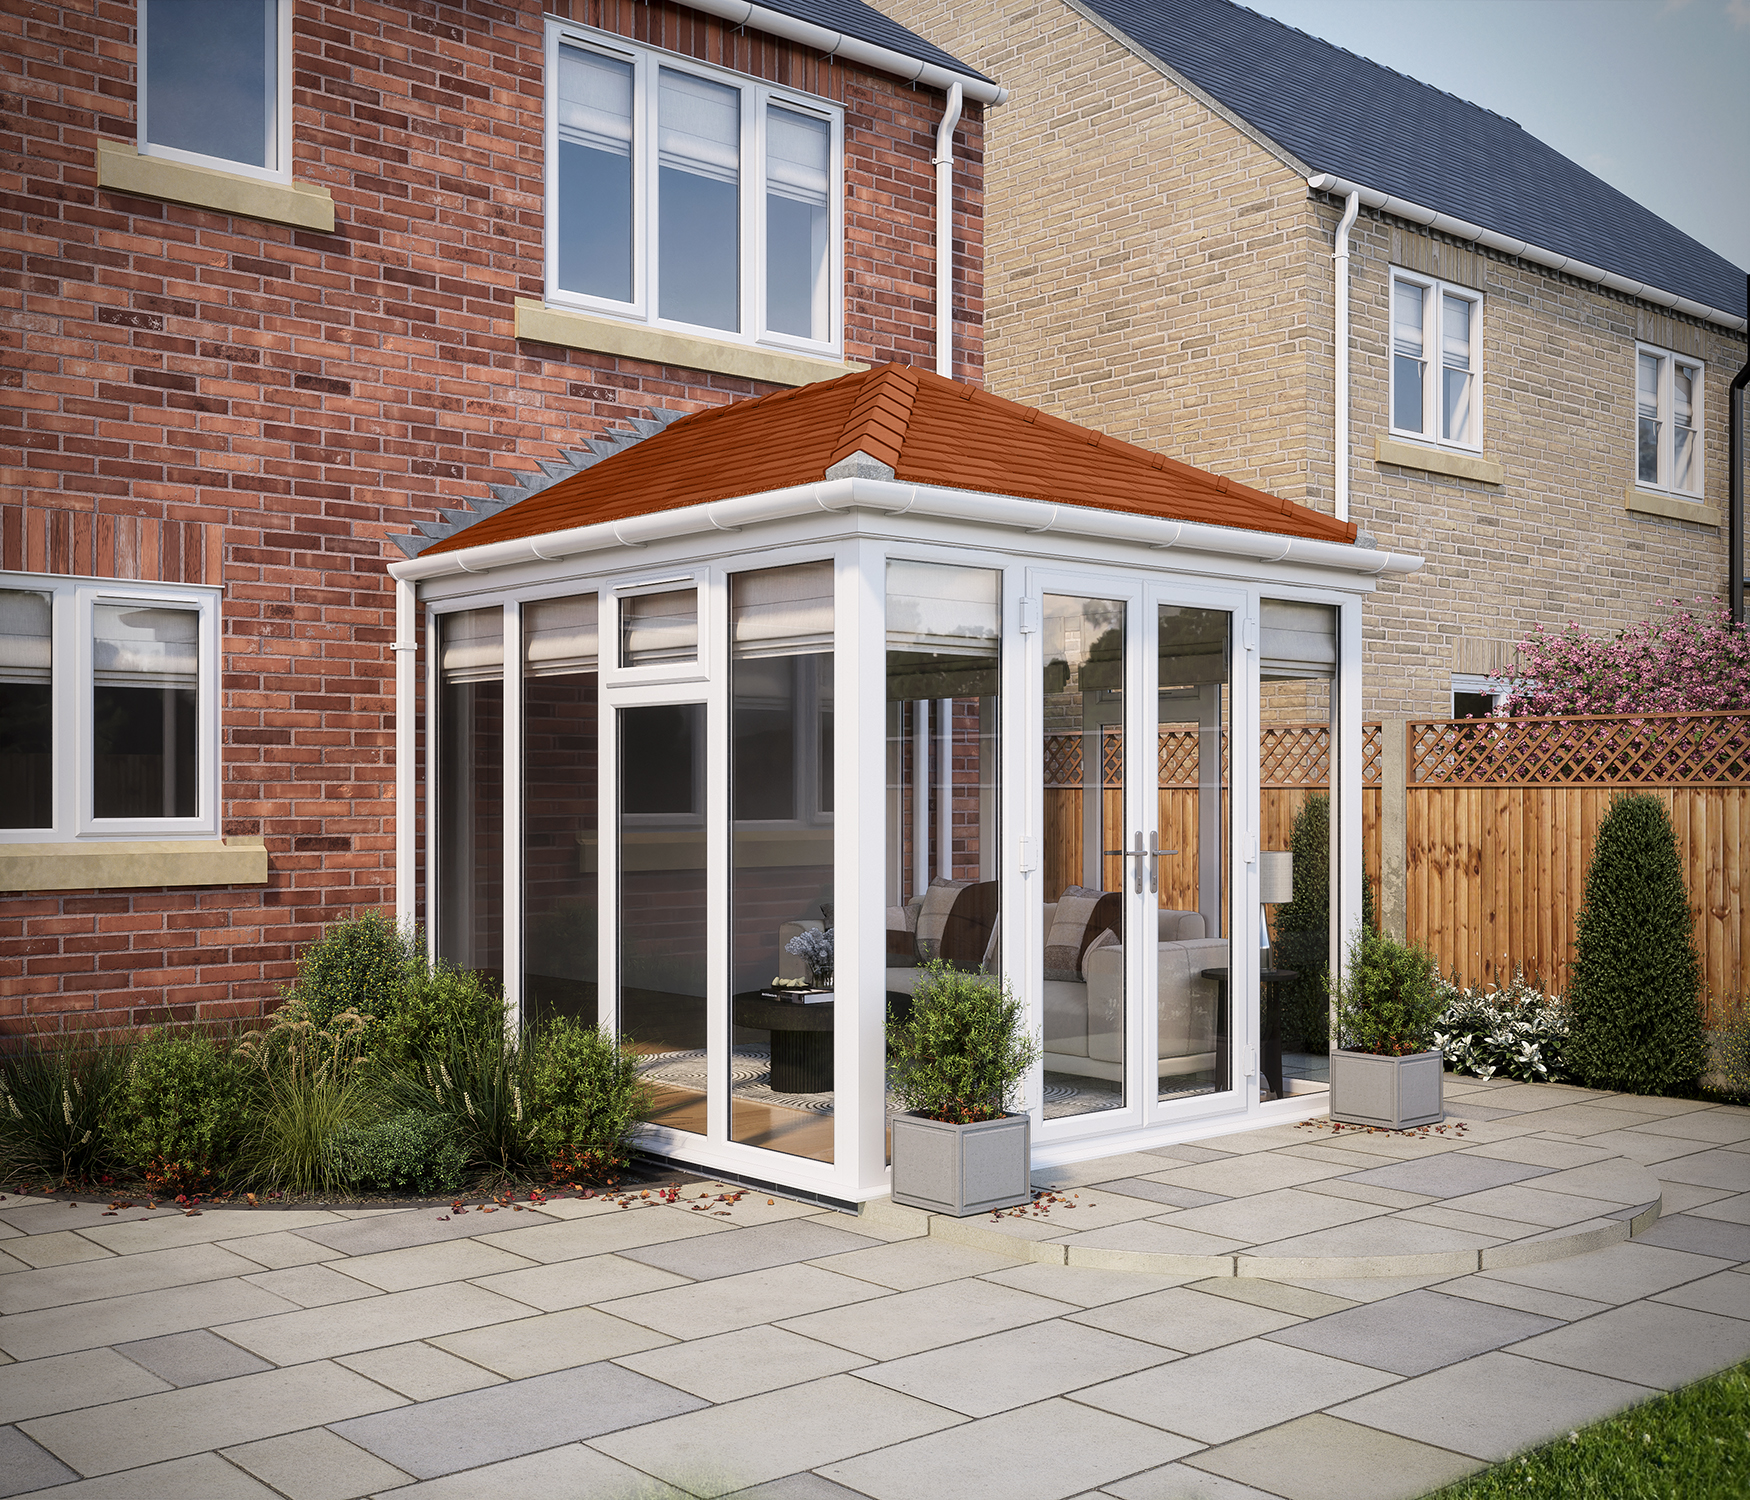 SOLid Roof Full Height Edwardian Conservatory White Frames with Rustic Terracotta Tiles - 10 x 10ft